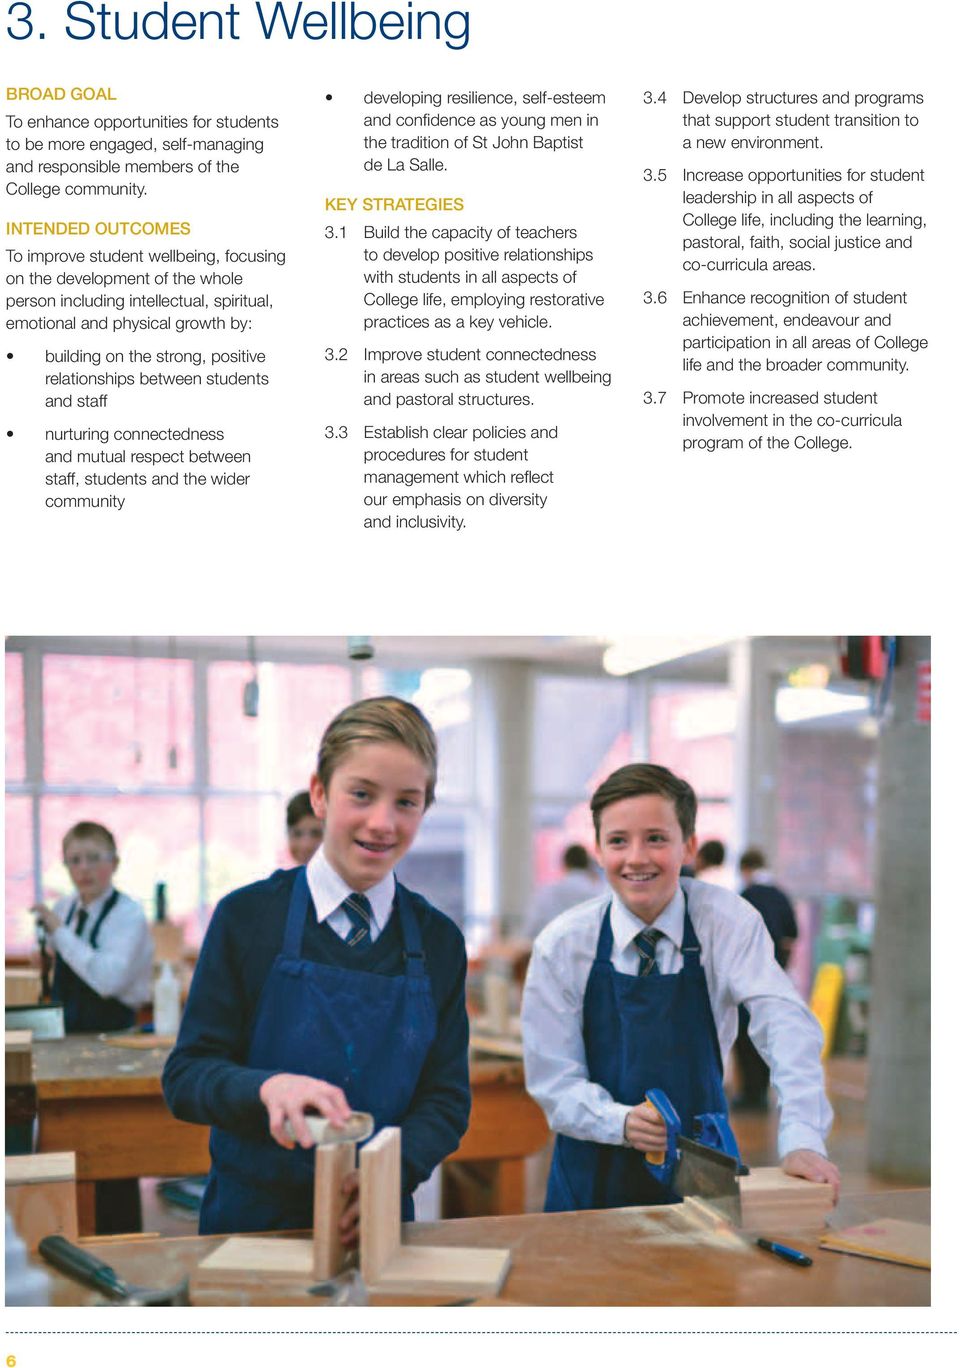 relationships between students and staff nurturing connectedness and mutual respect between staff, students and the wider community developing resilience, self-esteem and confidence as young men in